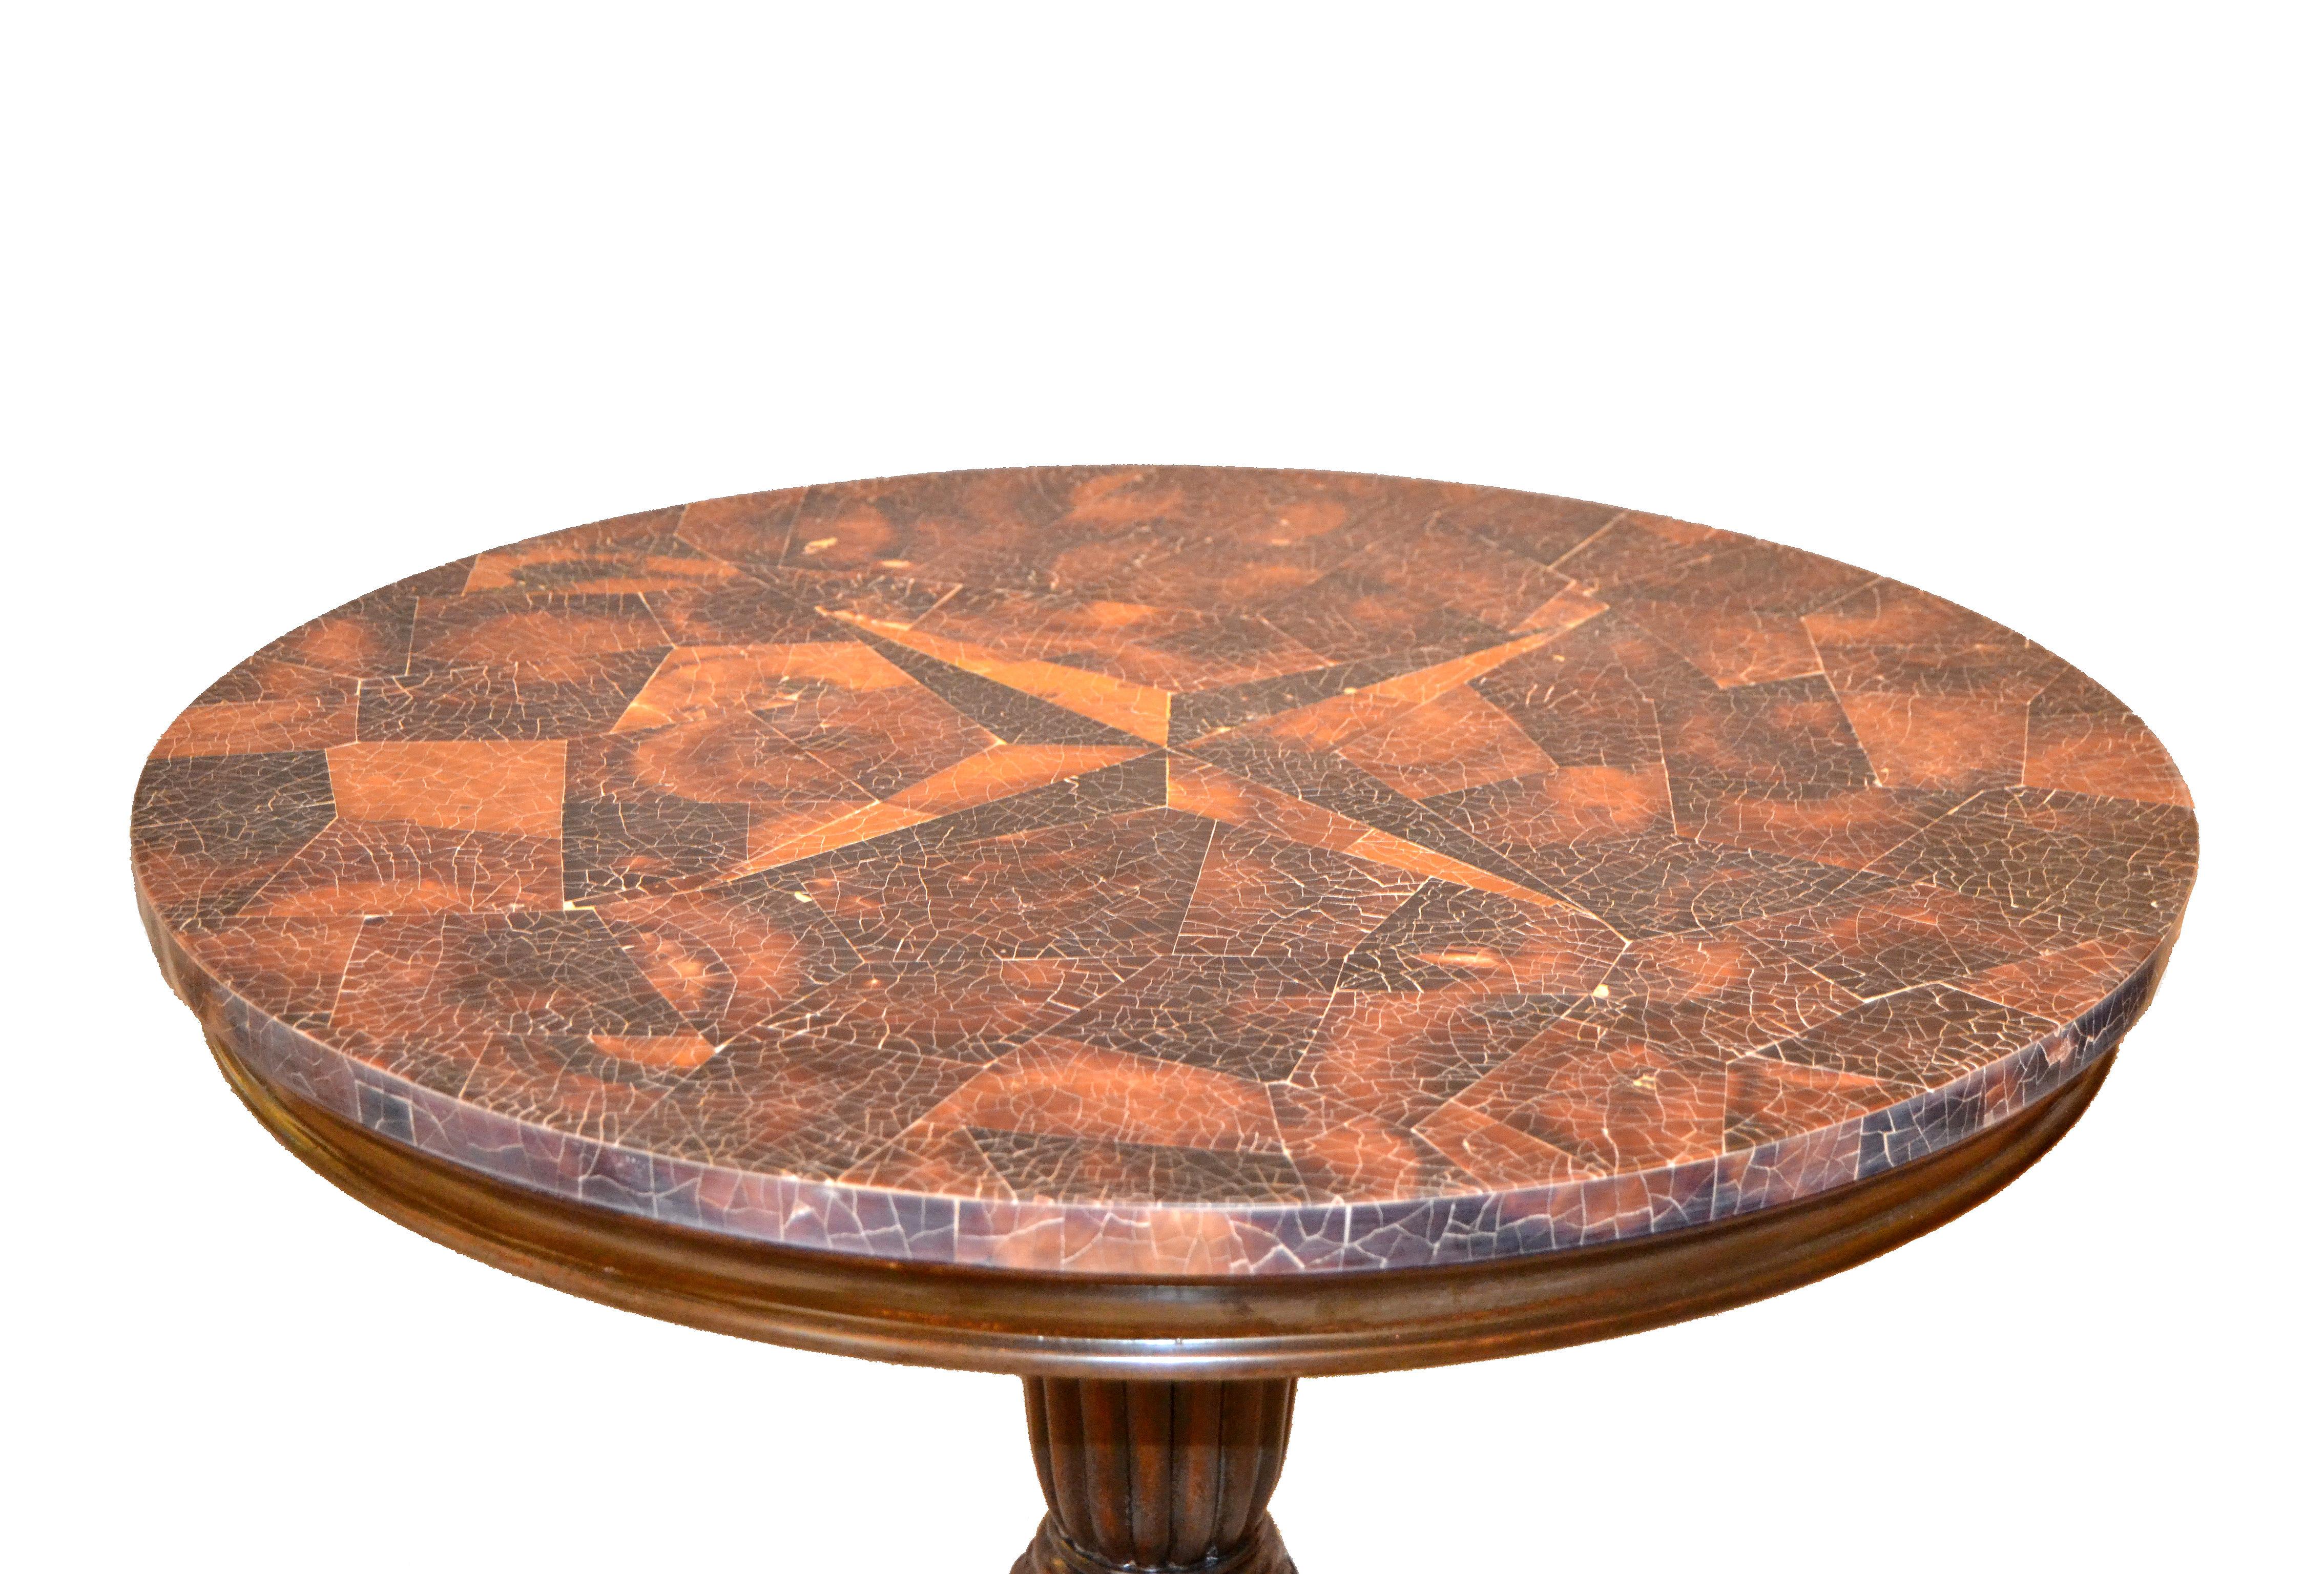 Great Maitland-Smith round coconut and hand-carved wood accent side table.
The top is created with pieces of coconut in a stunning manner.
The stem is hand-carved wood supported by a sturdy base.
It is marked underneath with made in the